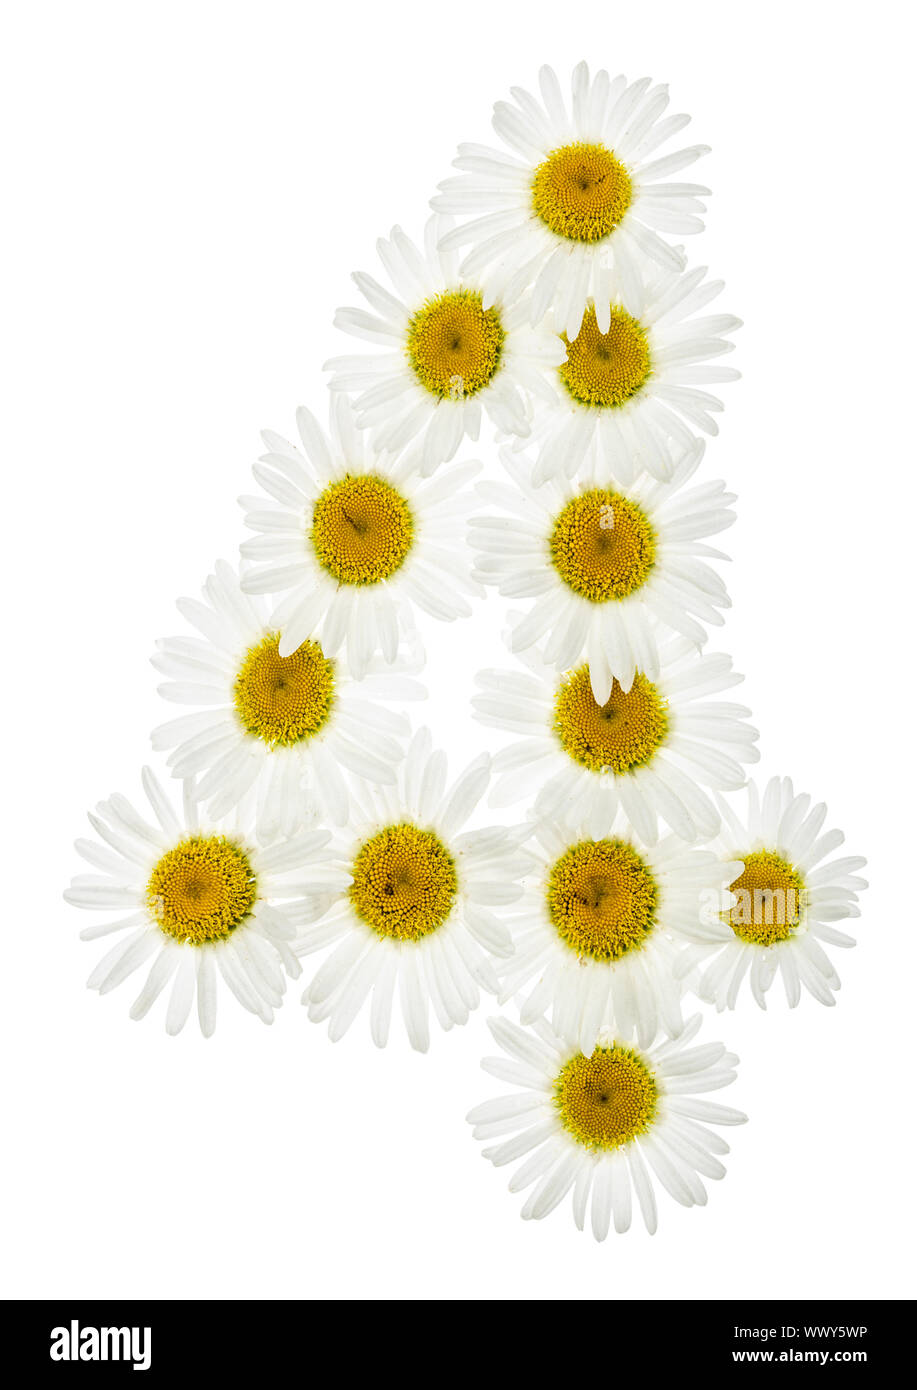 Arabic numeral 4, four, from white flowers of chamomile, isolated on white background Stock Photo